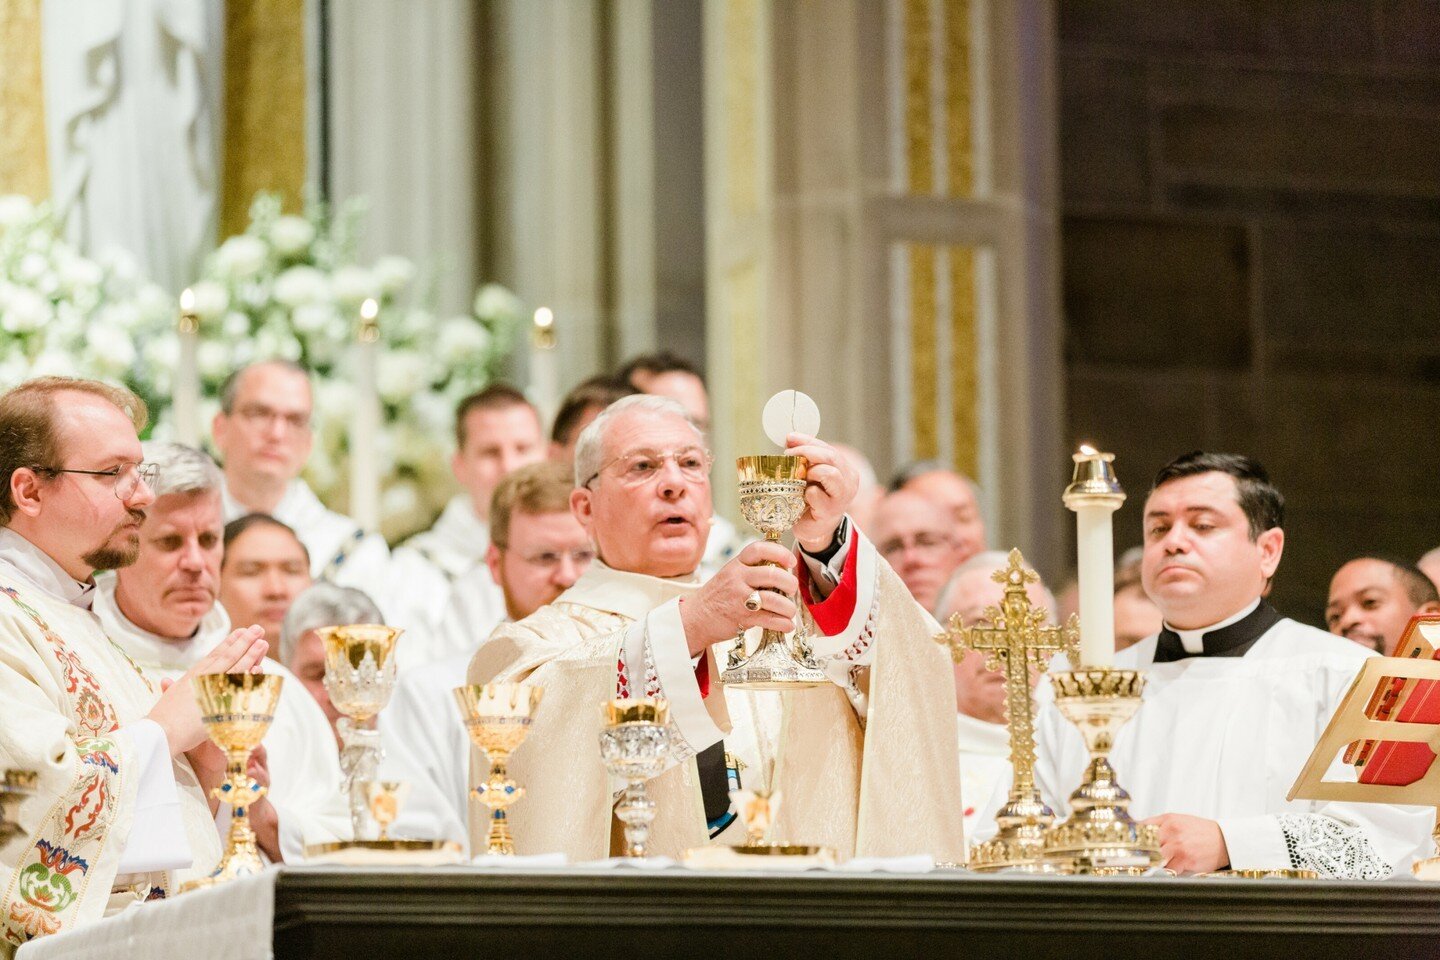 Traditionally held on Holy Thursday, but moved to Tuesday out of practicality, The Chrism Mass is a celebration of the entire archdiocese as priests, deacons, religious, and laity, gather with the archbishop and all our bishops as a family of faith.
